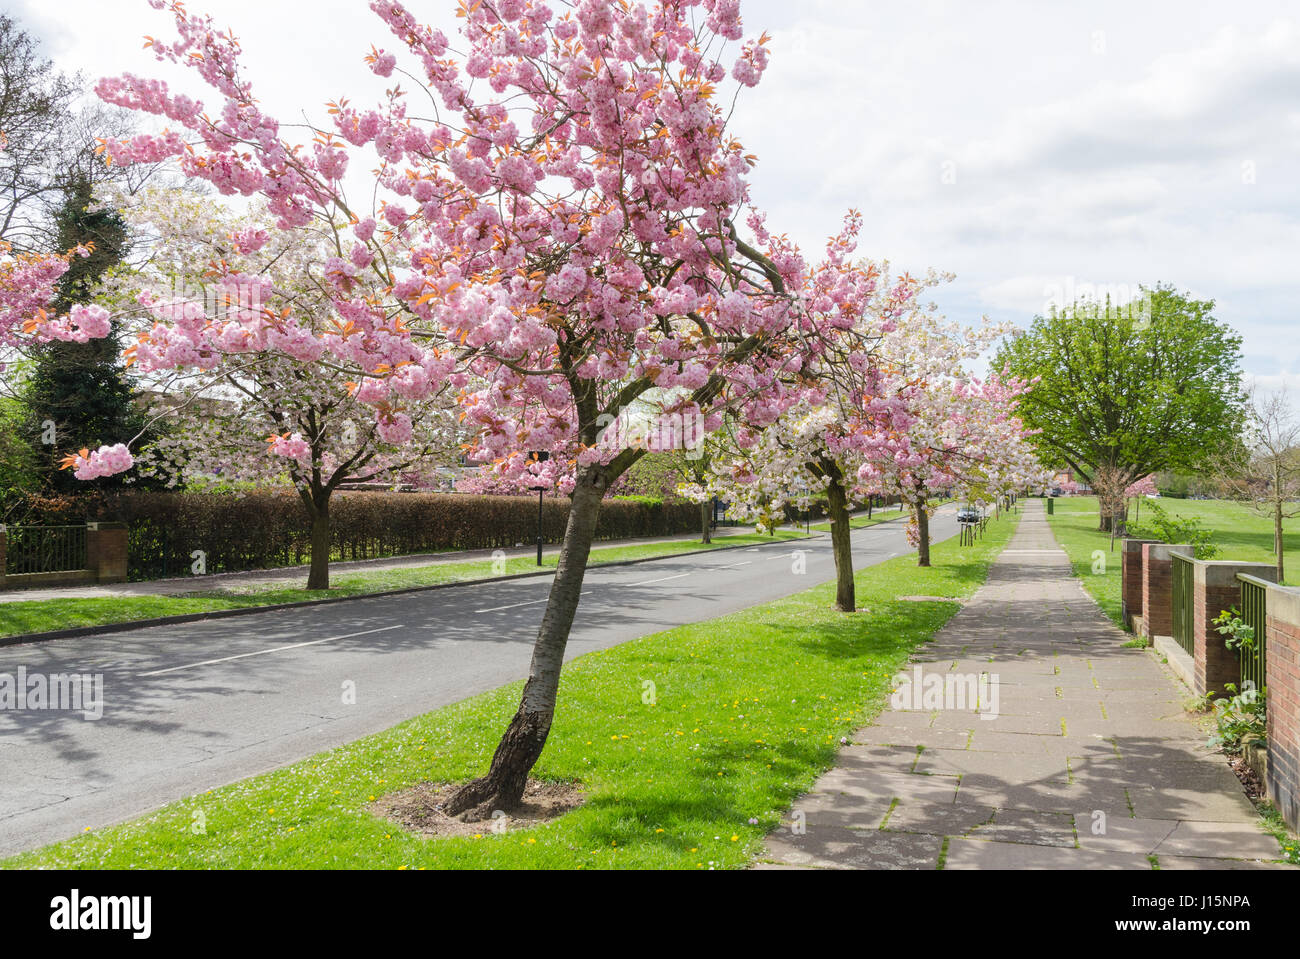 Blossom on trees lining Woodbrooke Road in Bournville, Birmingham Stock Photo